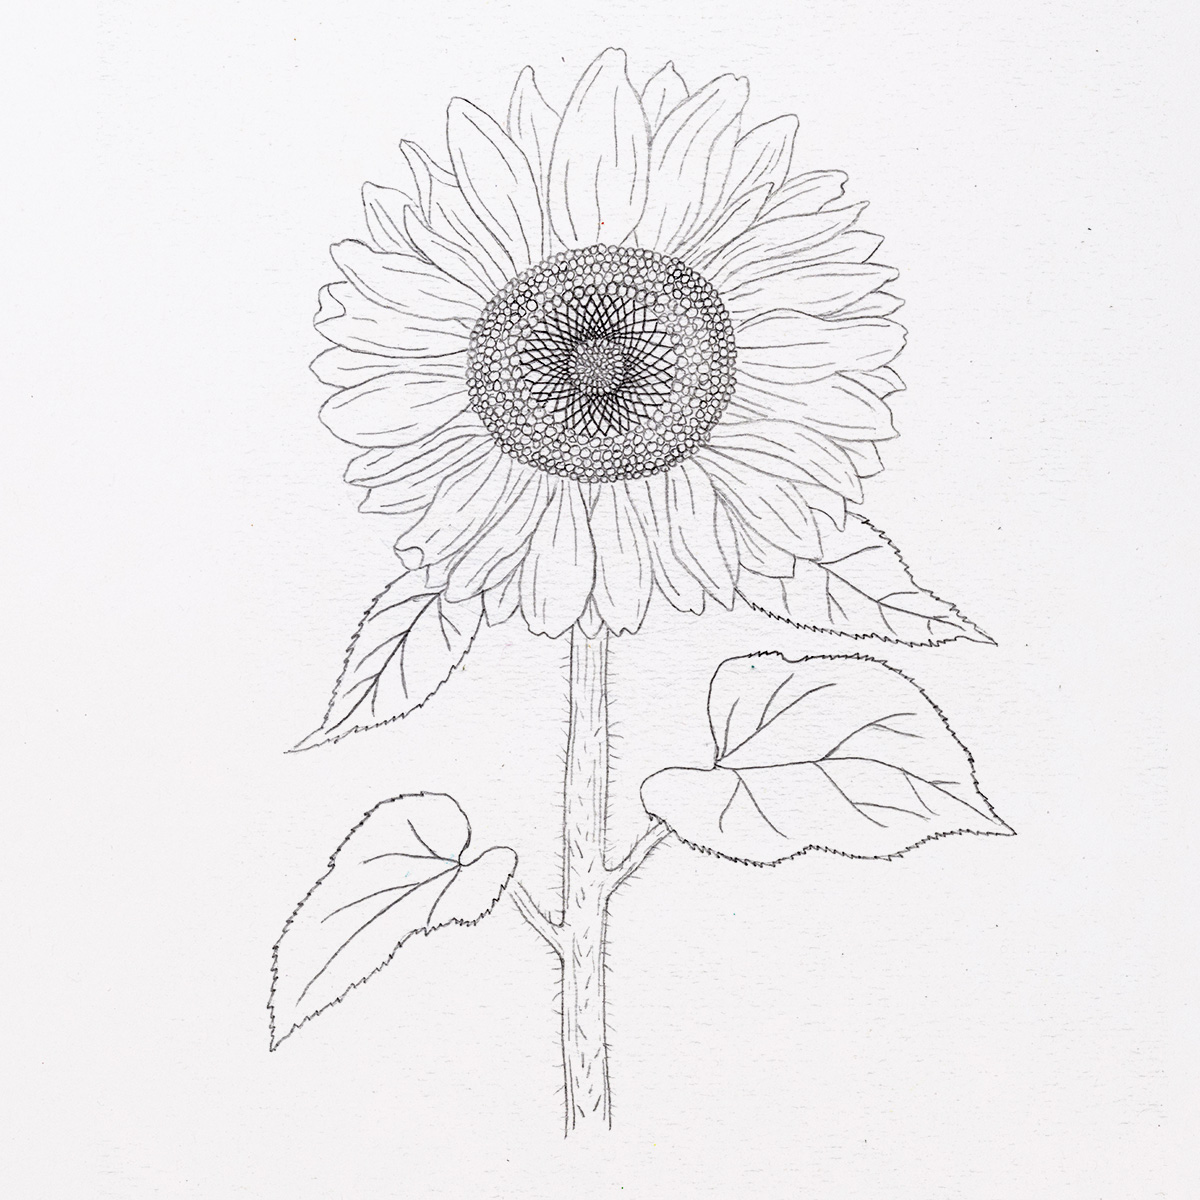 Sunflower sketch hand drawing Royalty Free Vector Image